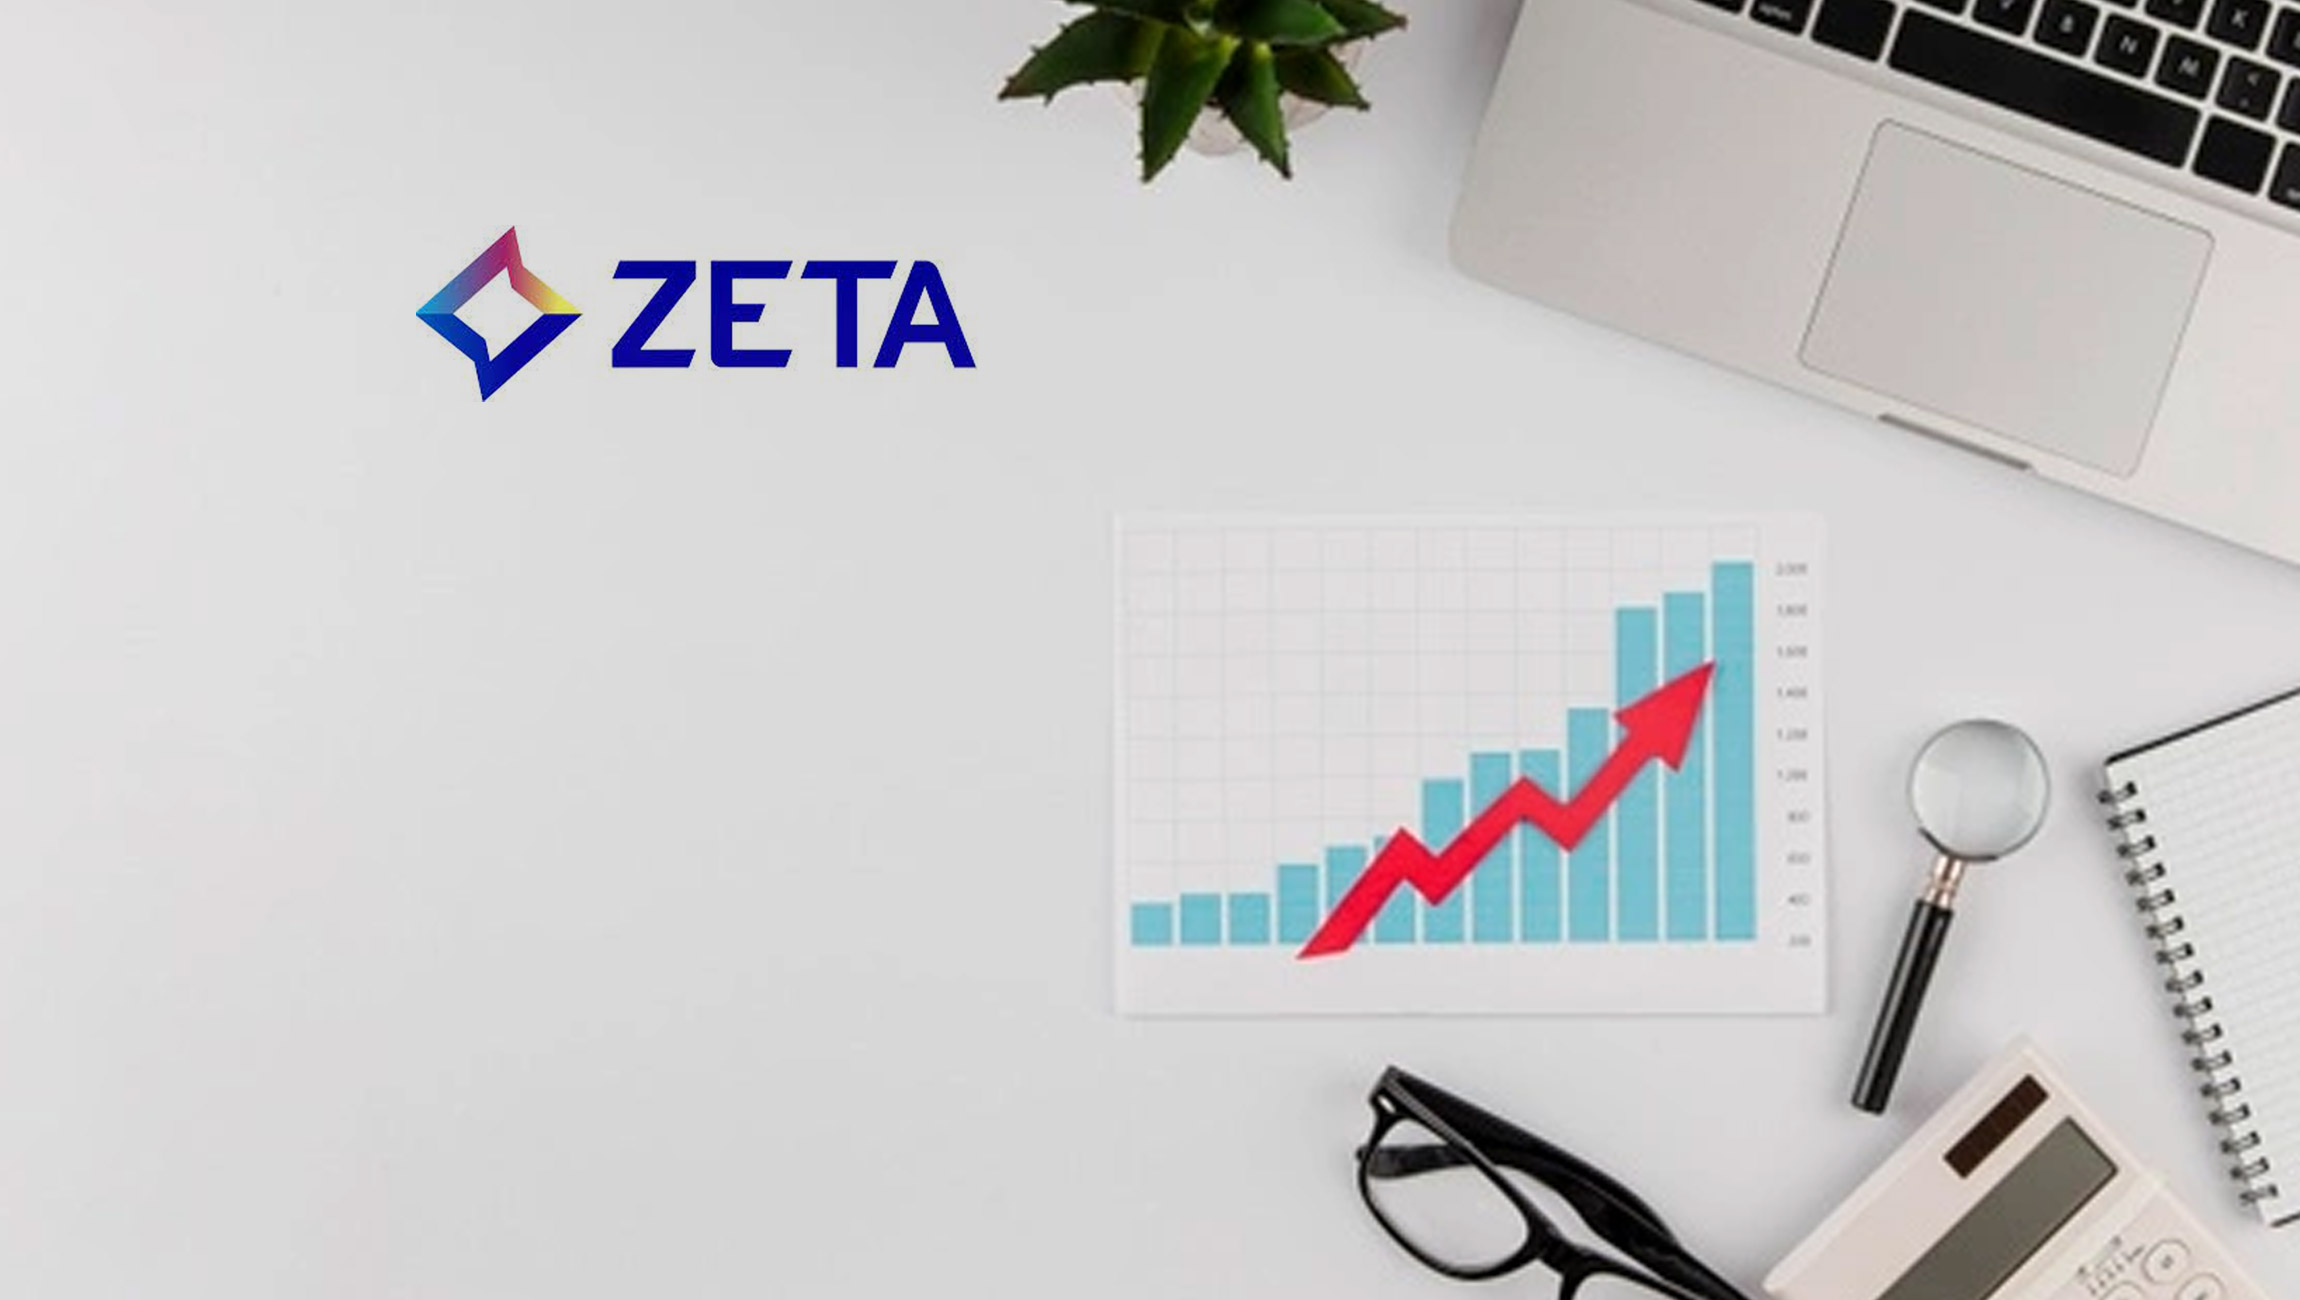 Zeta Strengthens Sales Leadership Team with Chief Revenue Officers to Build on Accelerated Growth